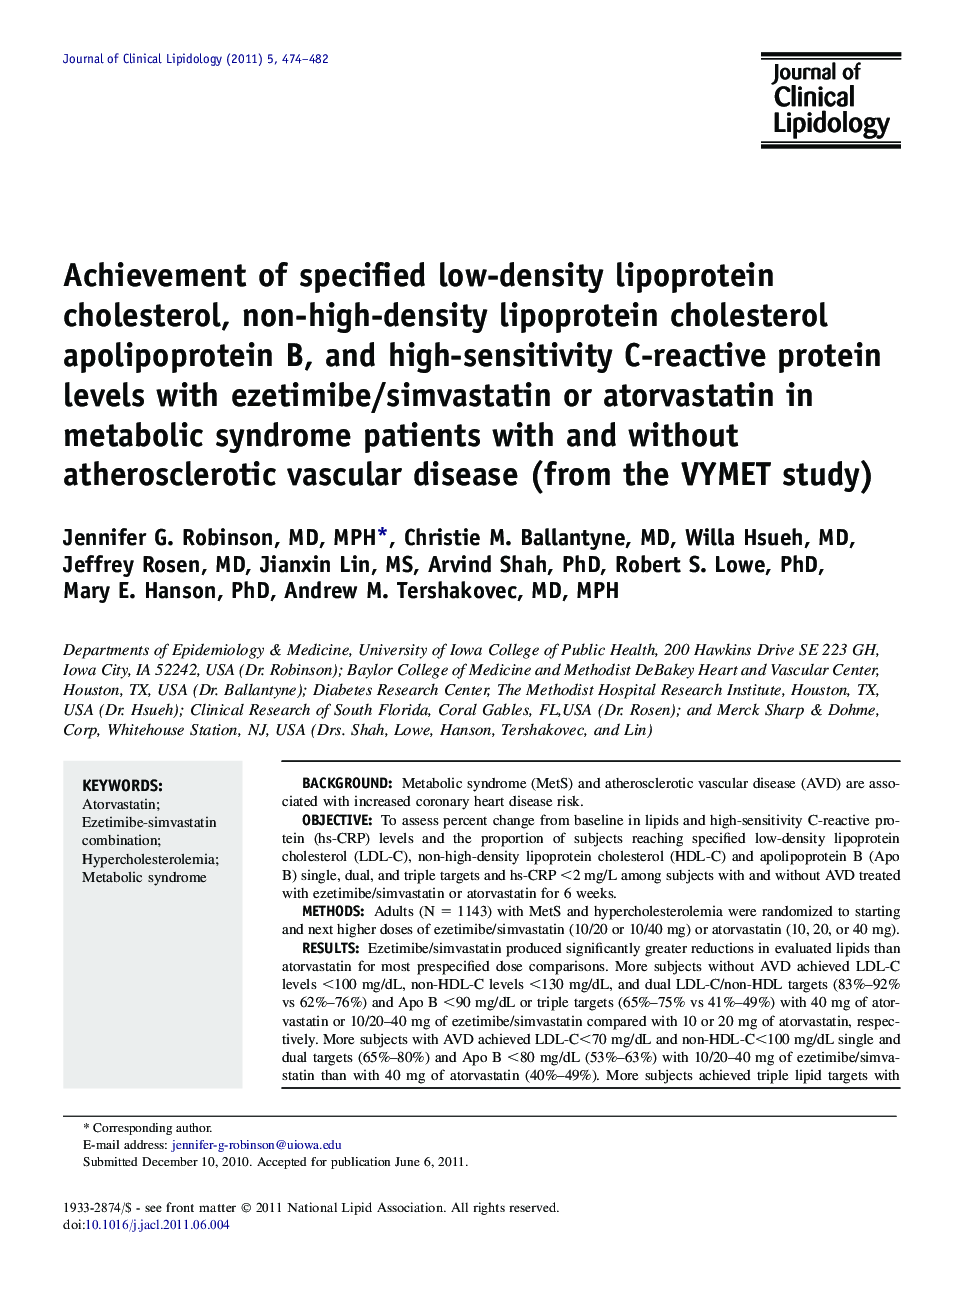 Achievement of specified low-density lipoprotein cholesterol, non-high-density lipoprotein cholesterol apolipoprotein B, and high-sensitivity C-reactive protein levels with ezetimibe/simvastatin or atorvastatin in metabolic syndrome patients with and with